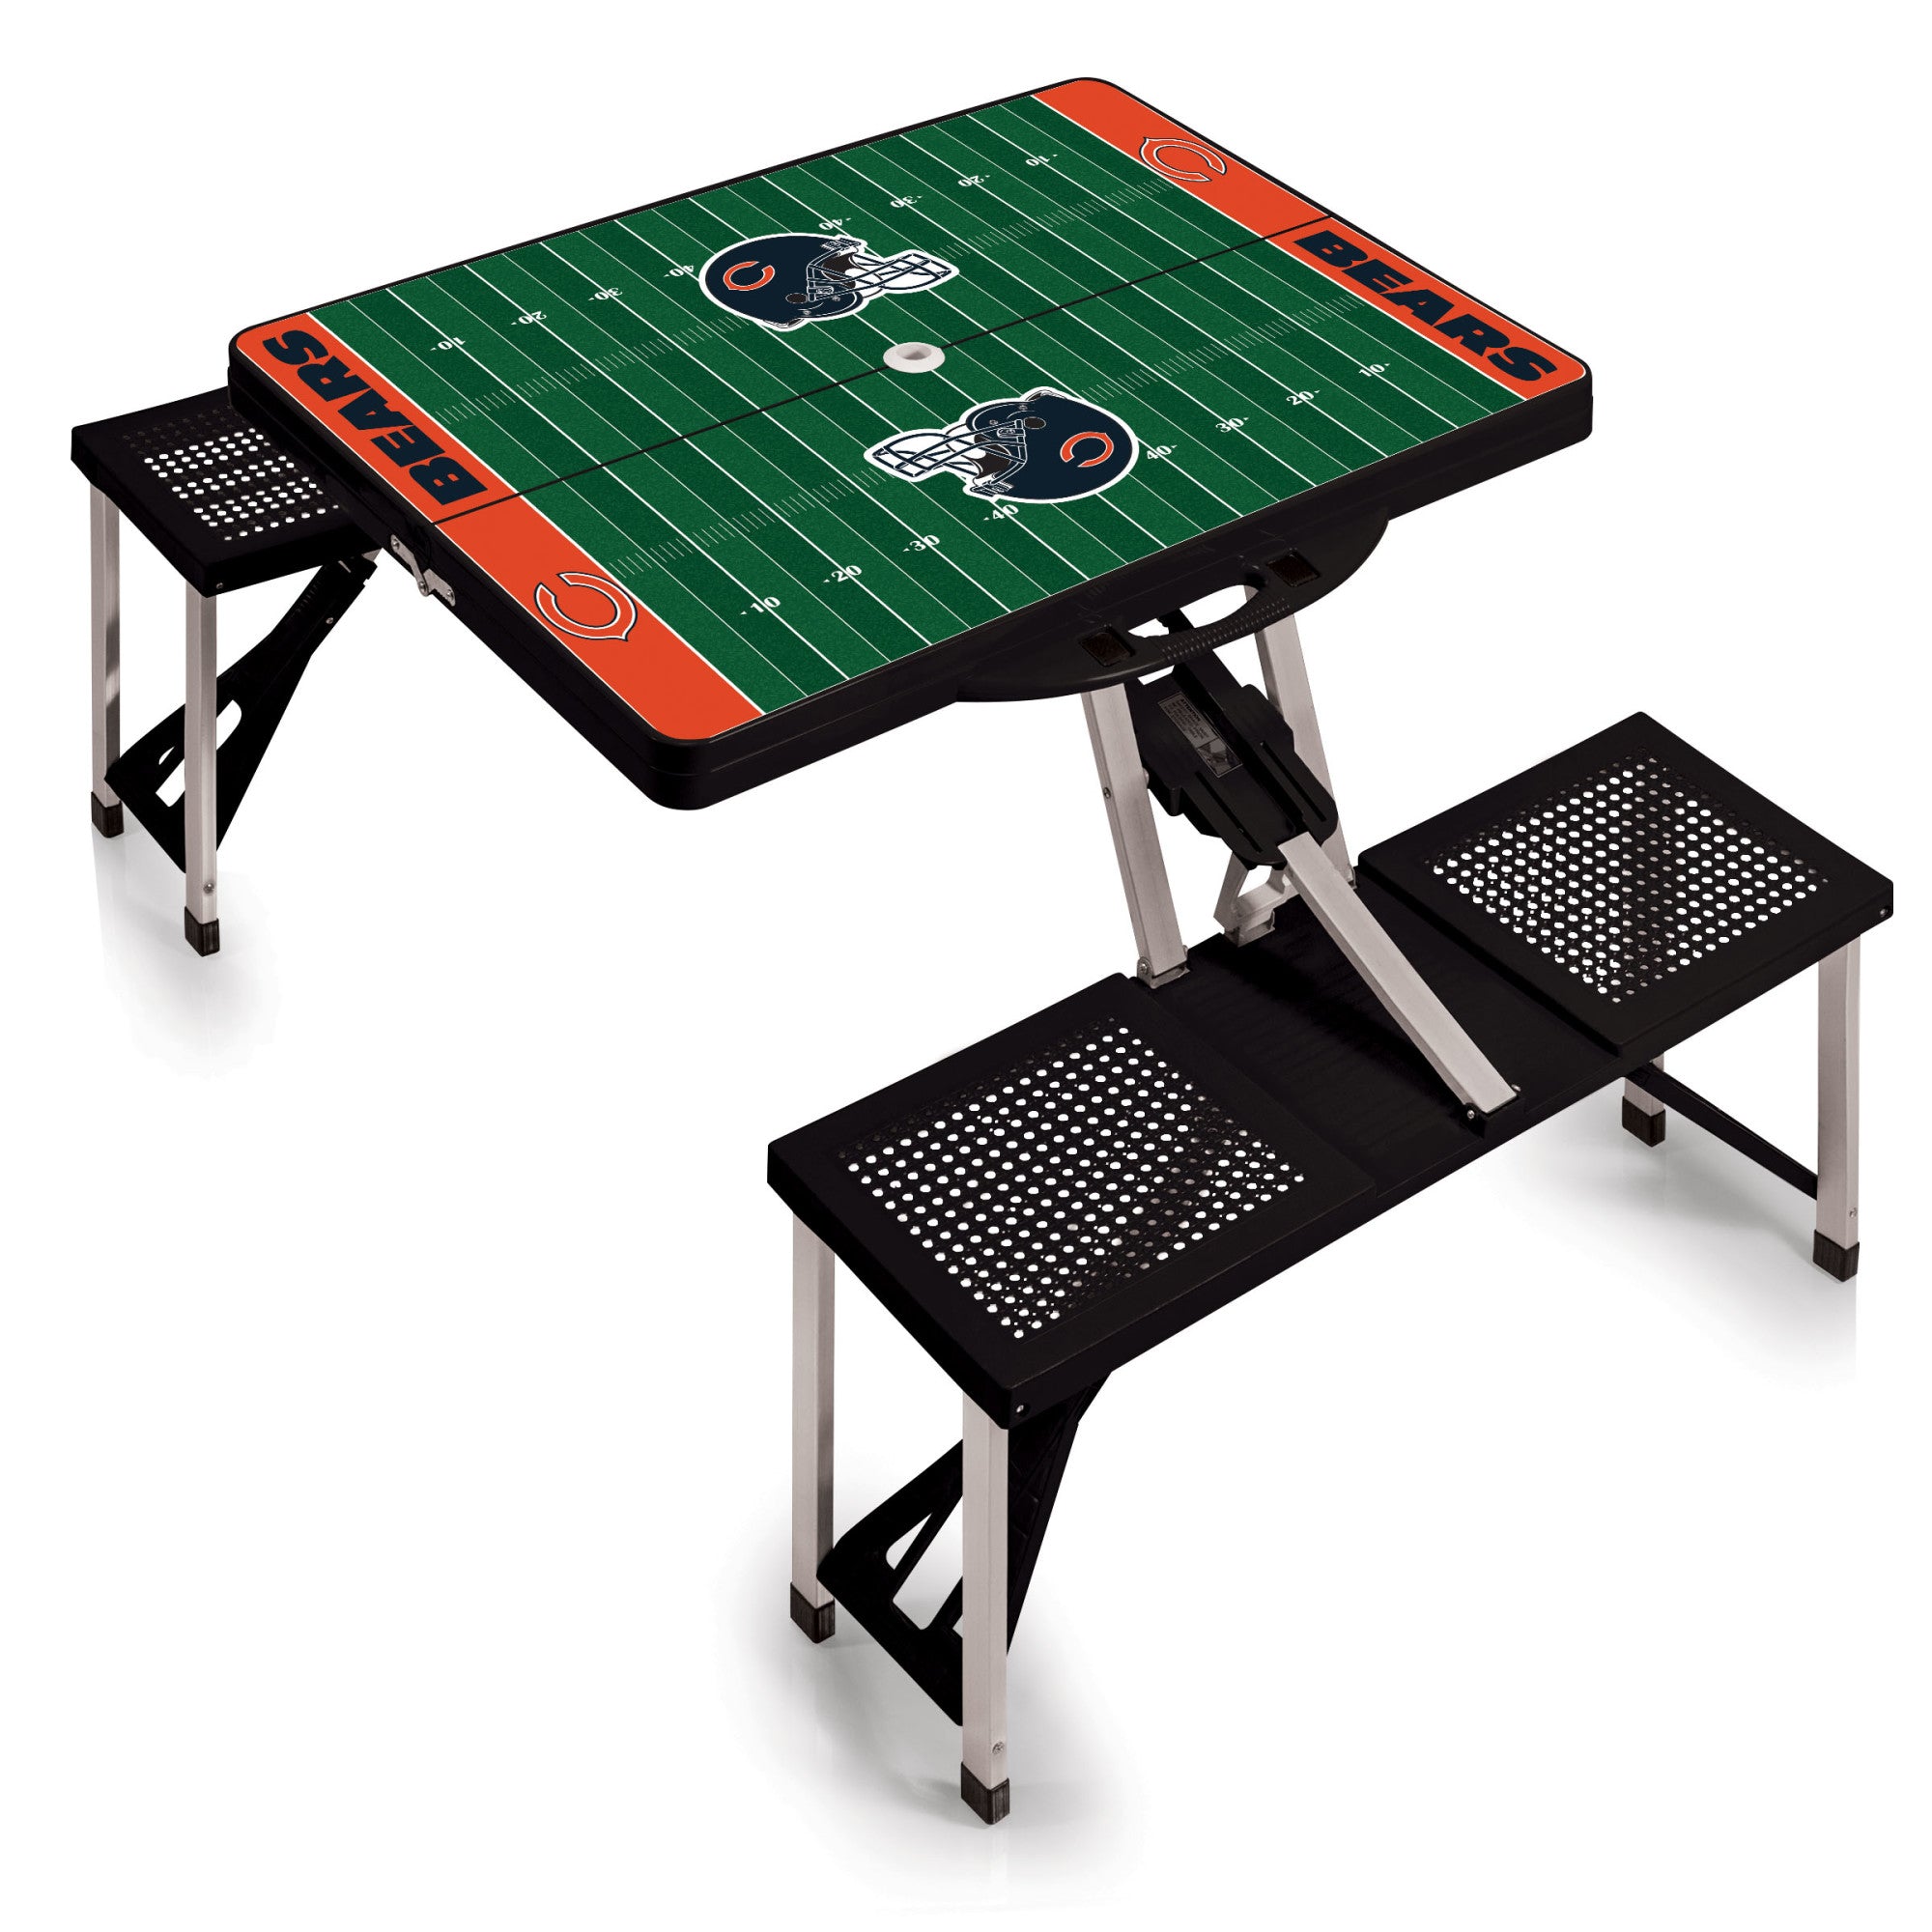 Chicago Bears - Picnic Table Portable Folding Table with Seats and Umbrella